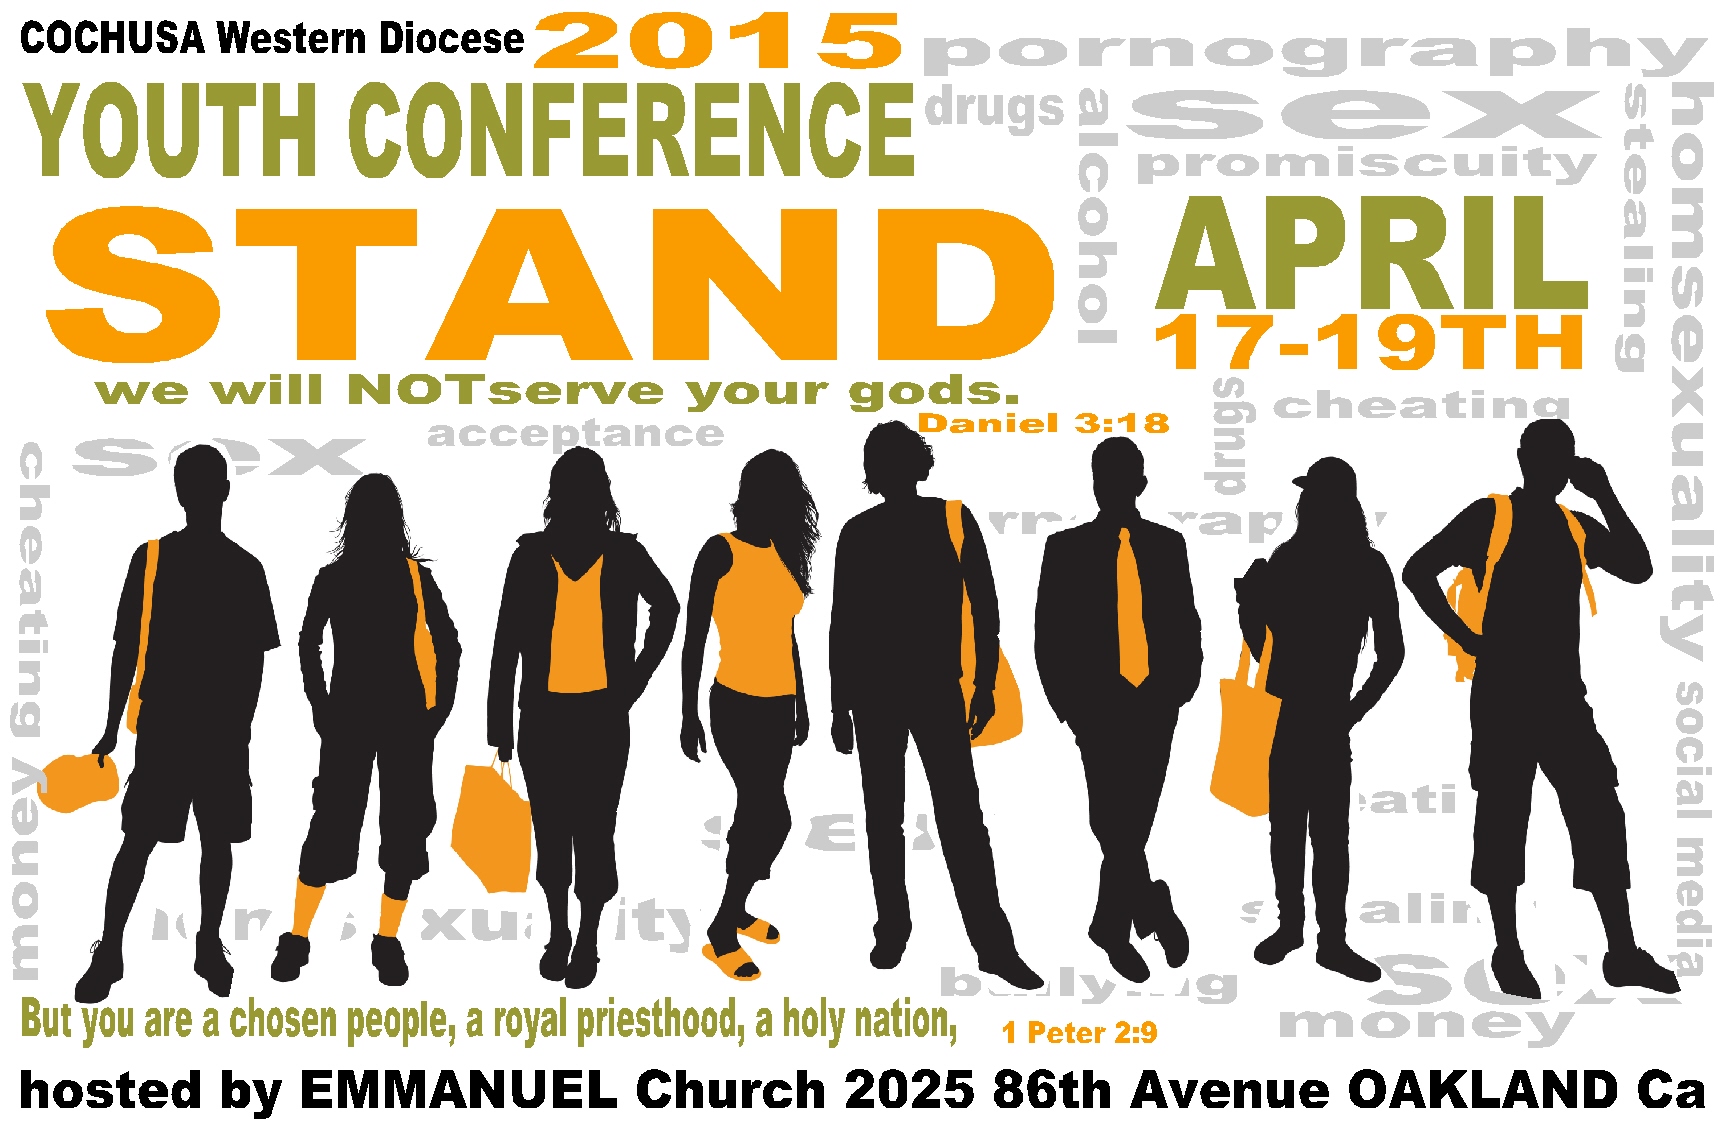 2015 Western Diocese Youth Conference